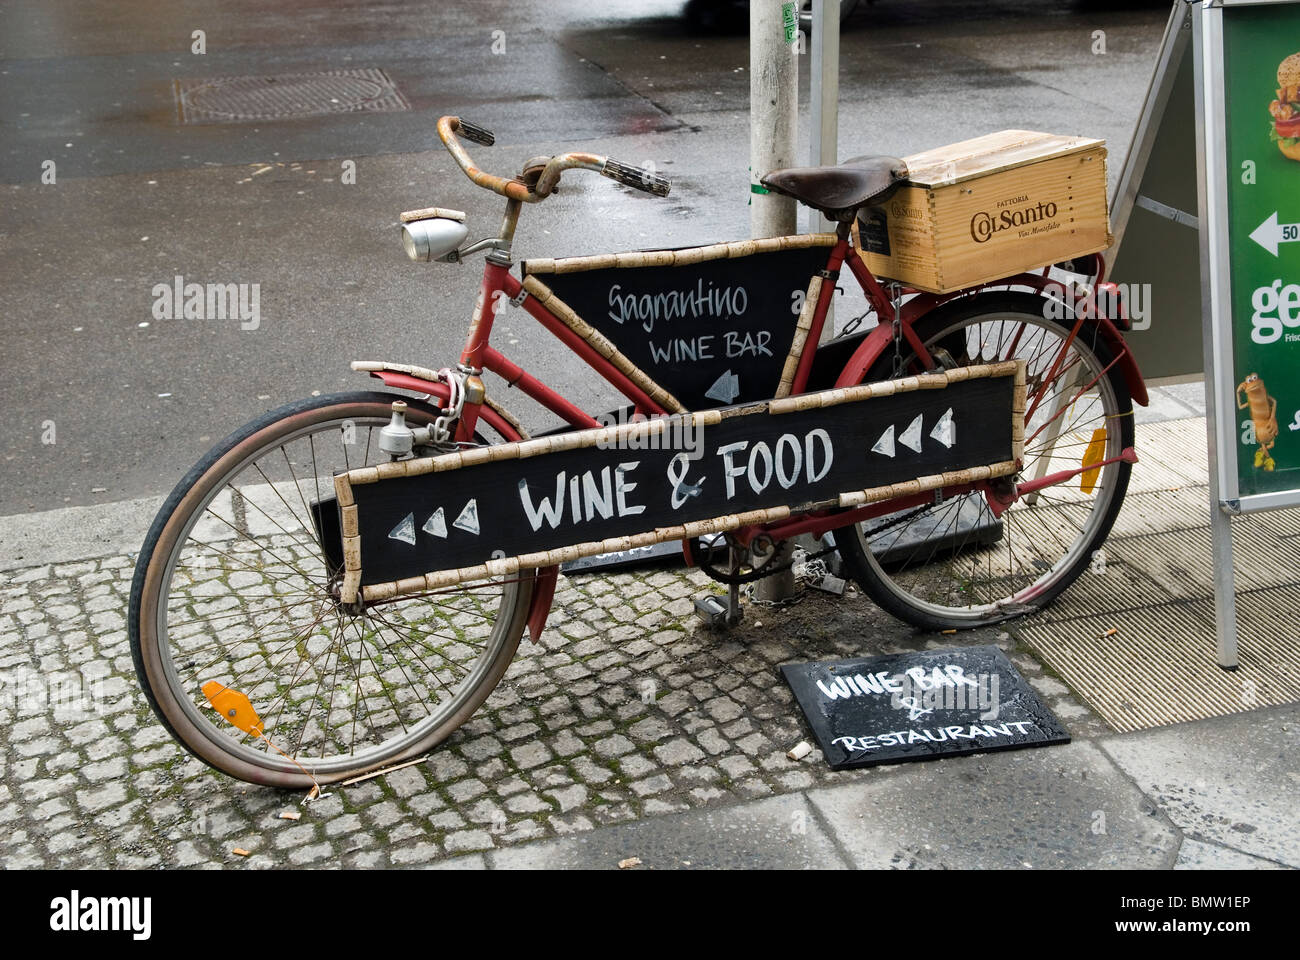 Wine bar sign on an old bicycle Berlin city Germany Stock Photo